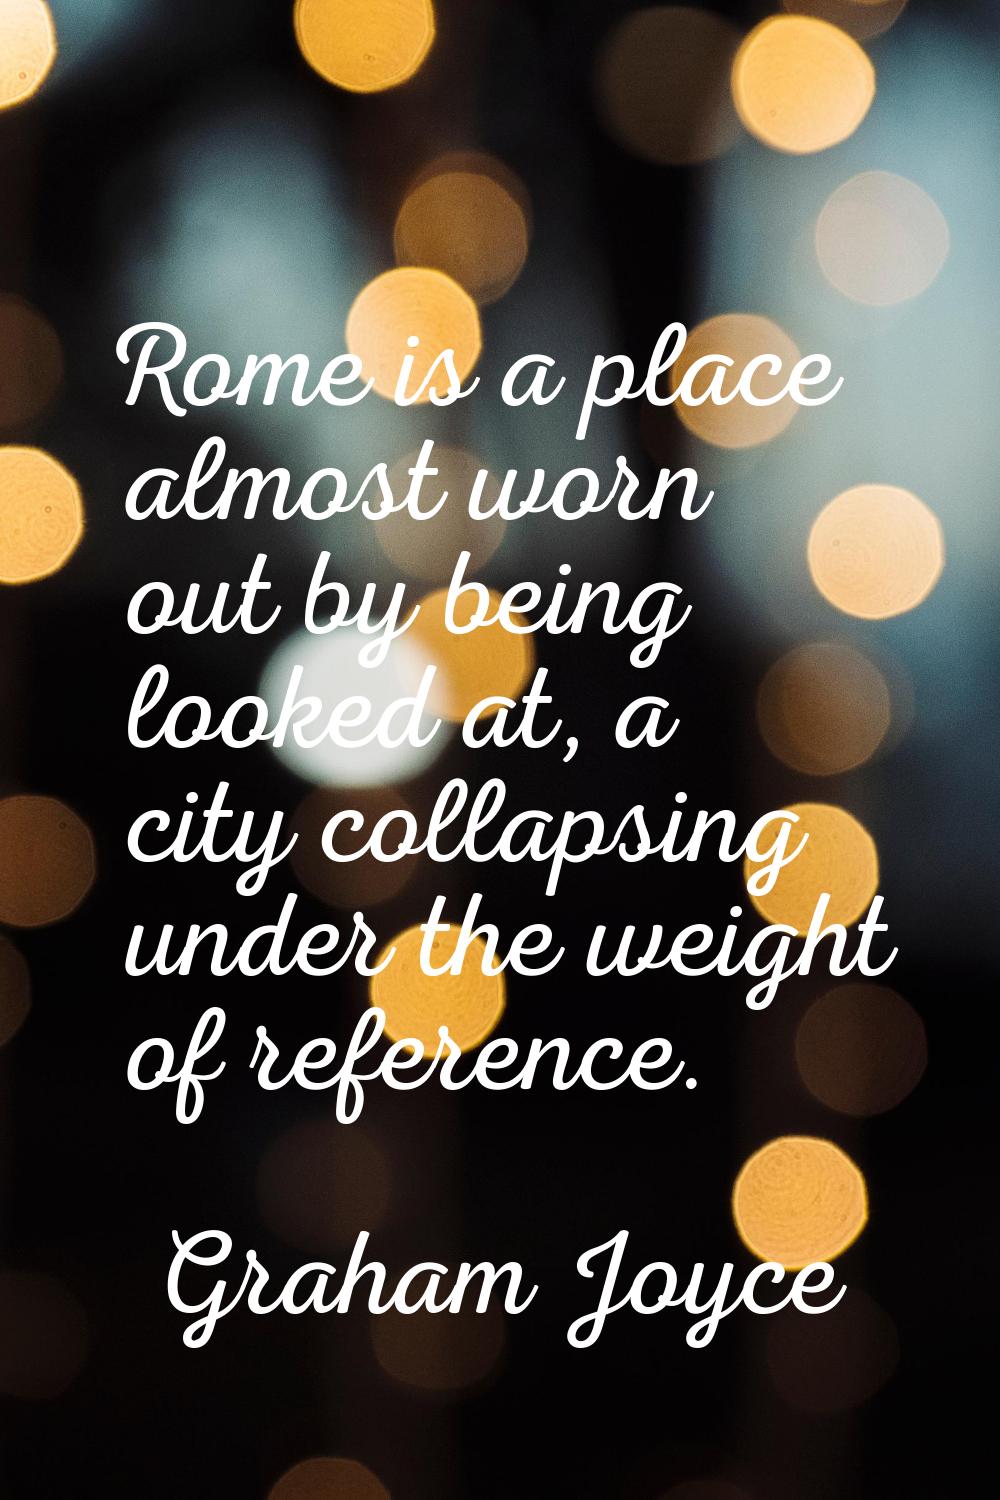 Rome is a place almost worn out by being looked at, a city collapsing under the weight of reference